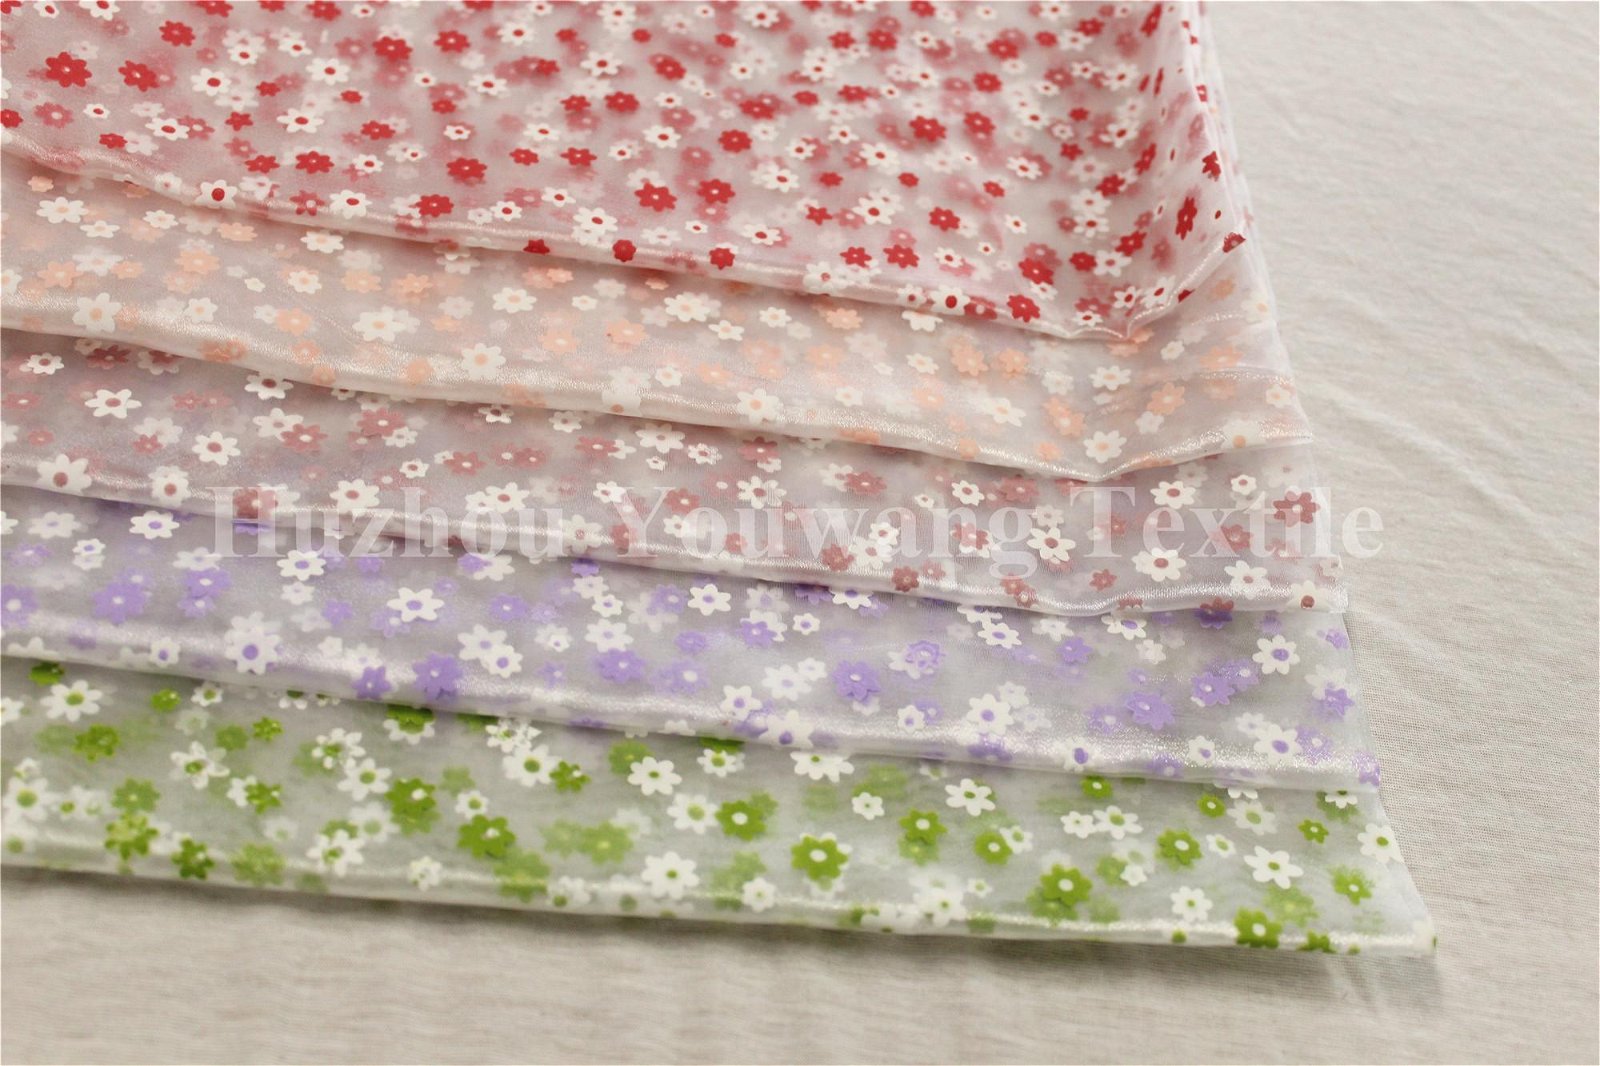 Printed Crystal Organza Fabric - YW-PO12 - YW-PO12 (China Manufacturer) -  Chemical Fabrics - Fabrics Products - DIYTrade China manufacturers